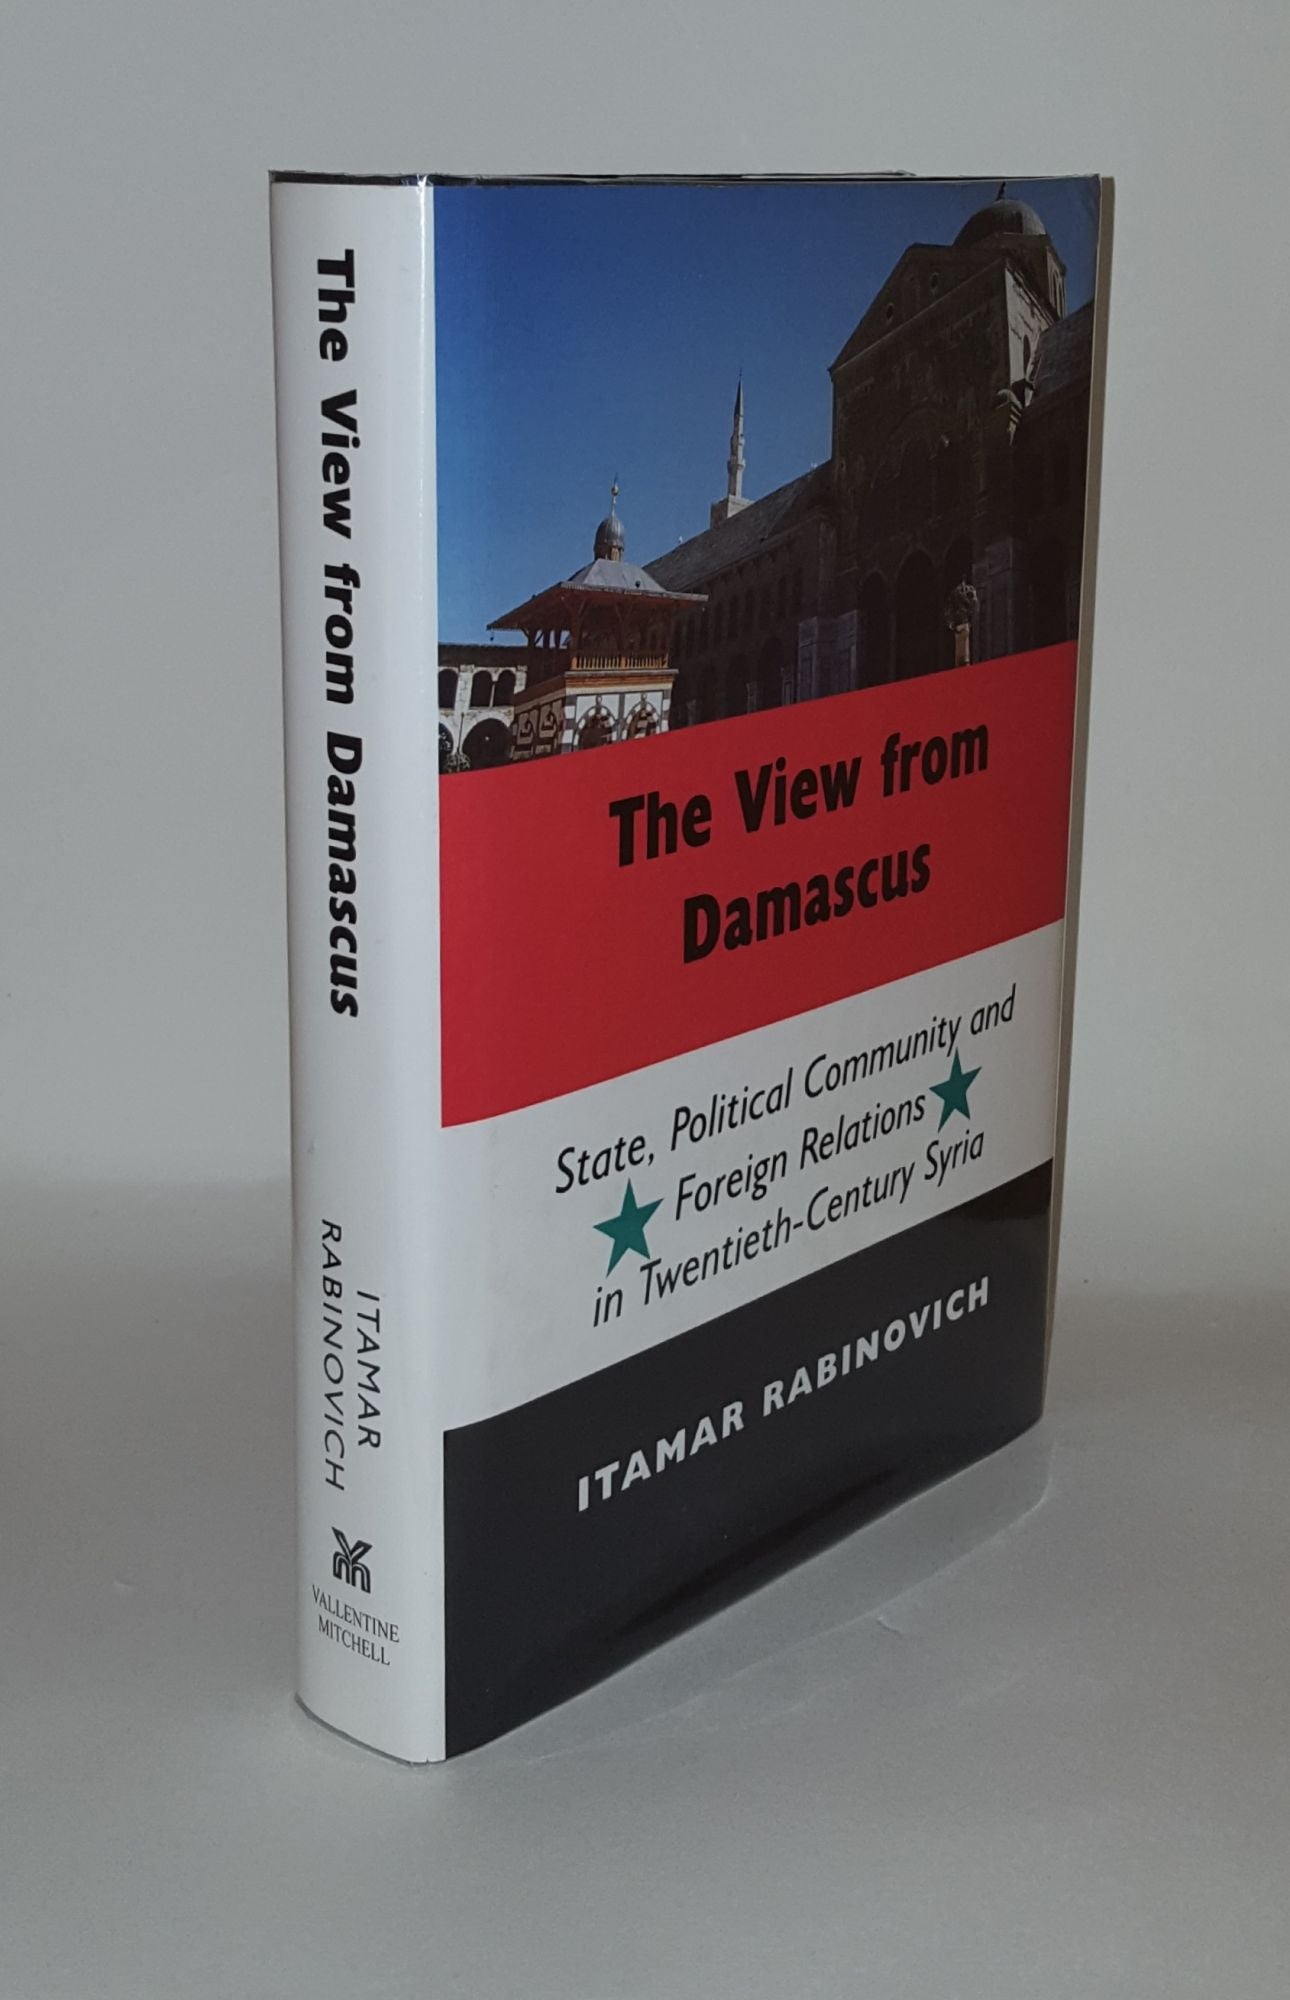 RABINOVICH Itamar - The View from Damascus State Political Community and Foreign Relations in Twentieth-Century Syria